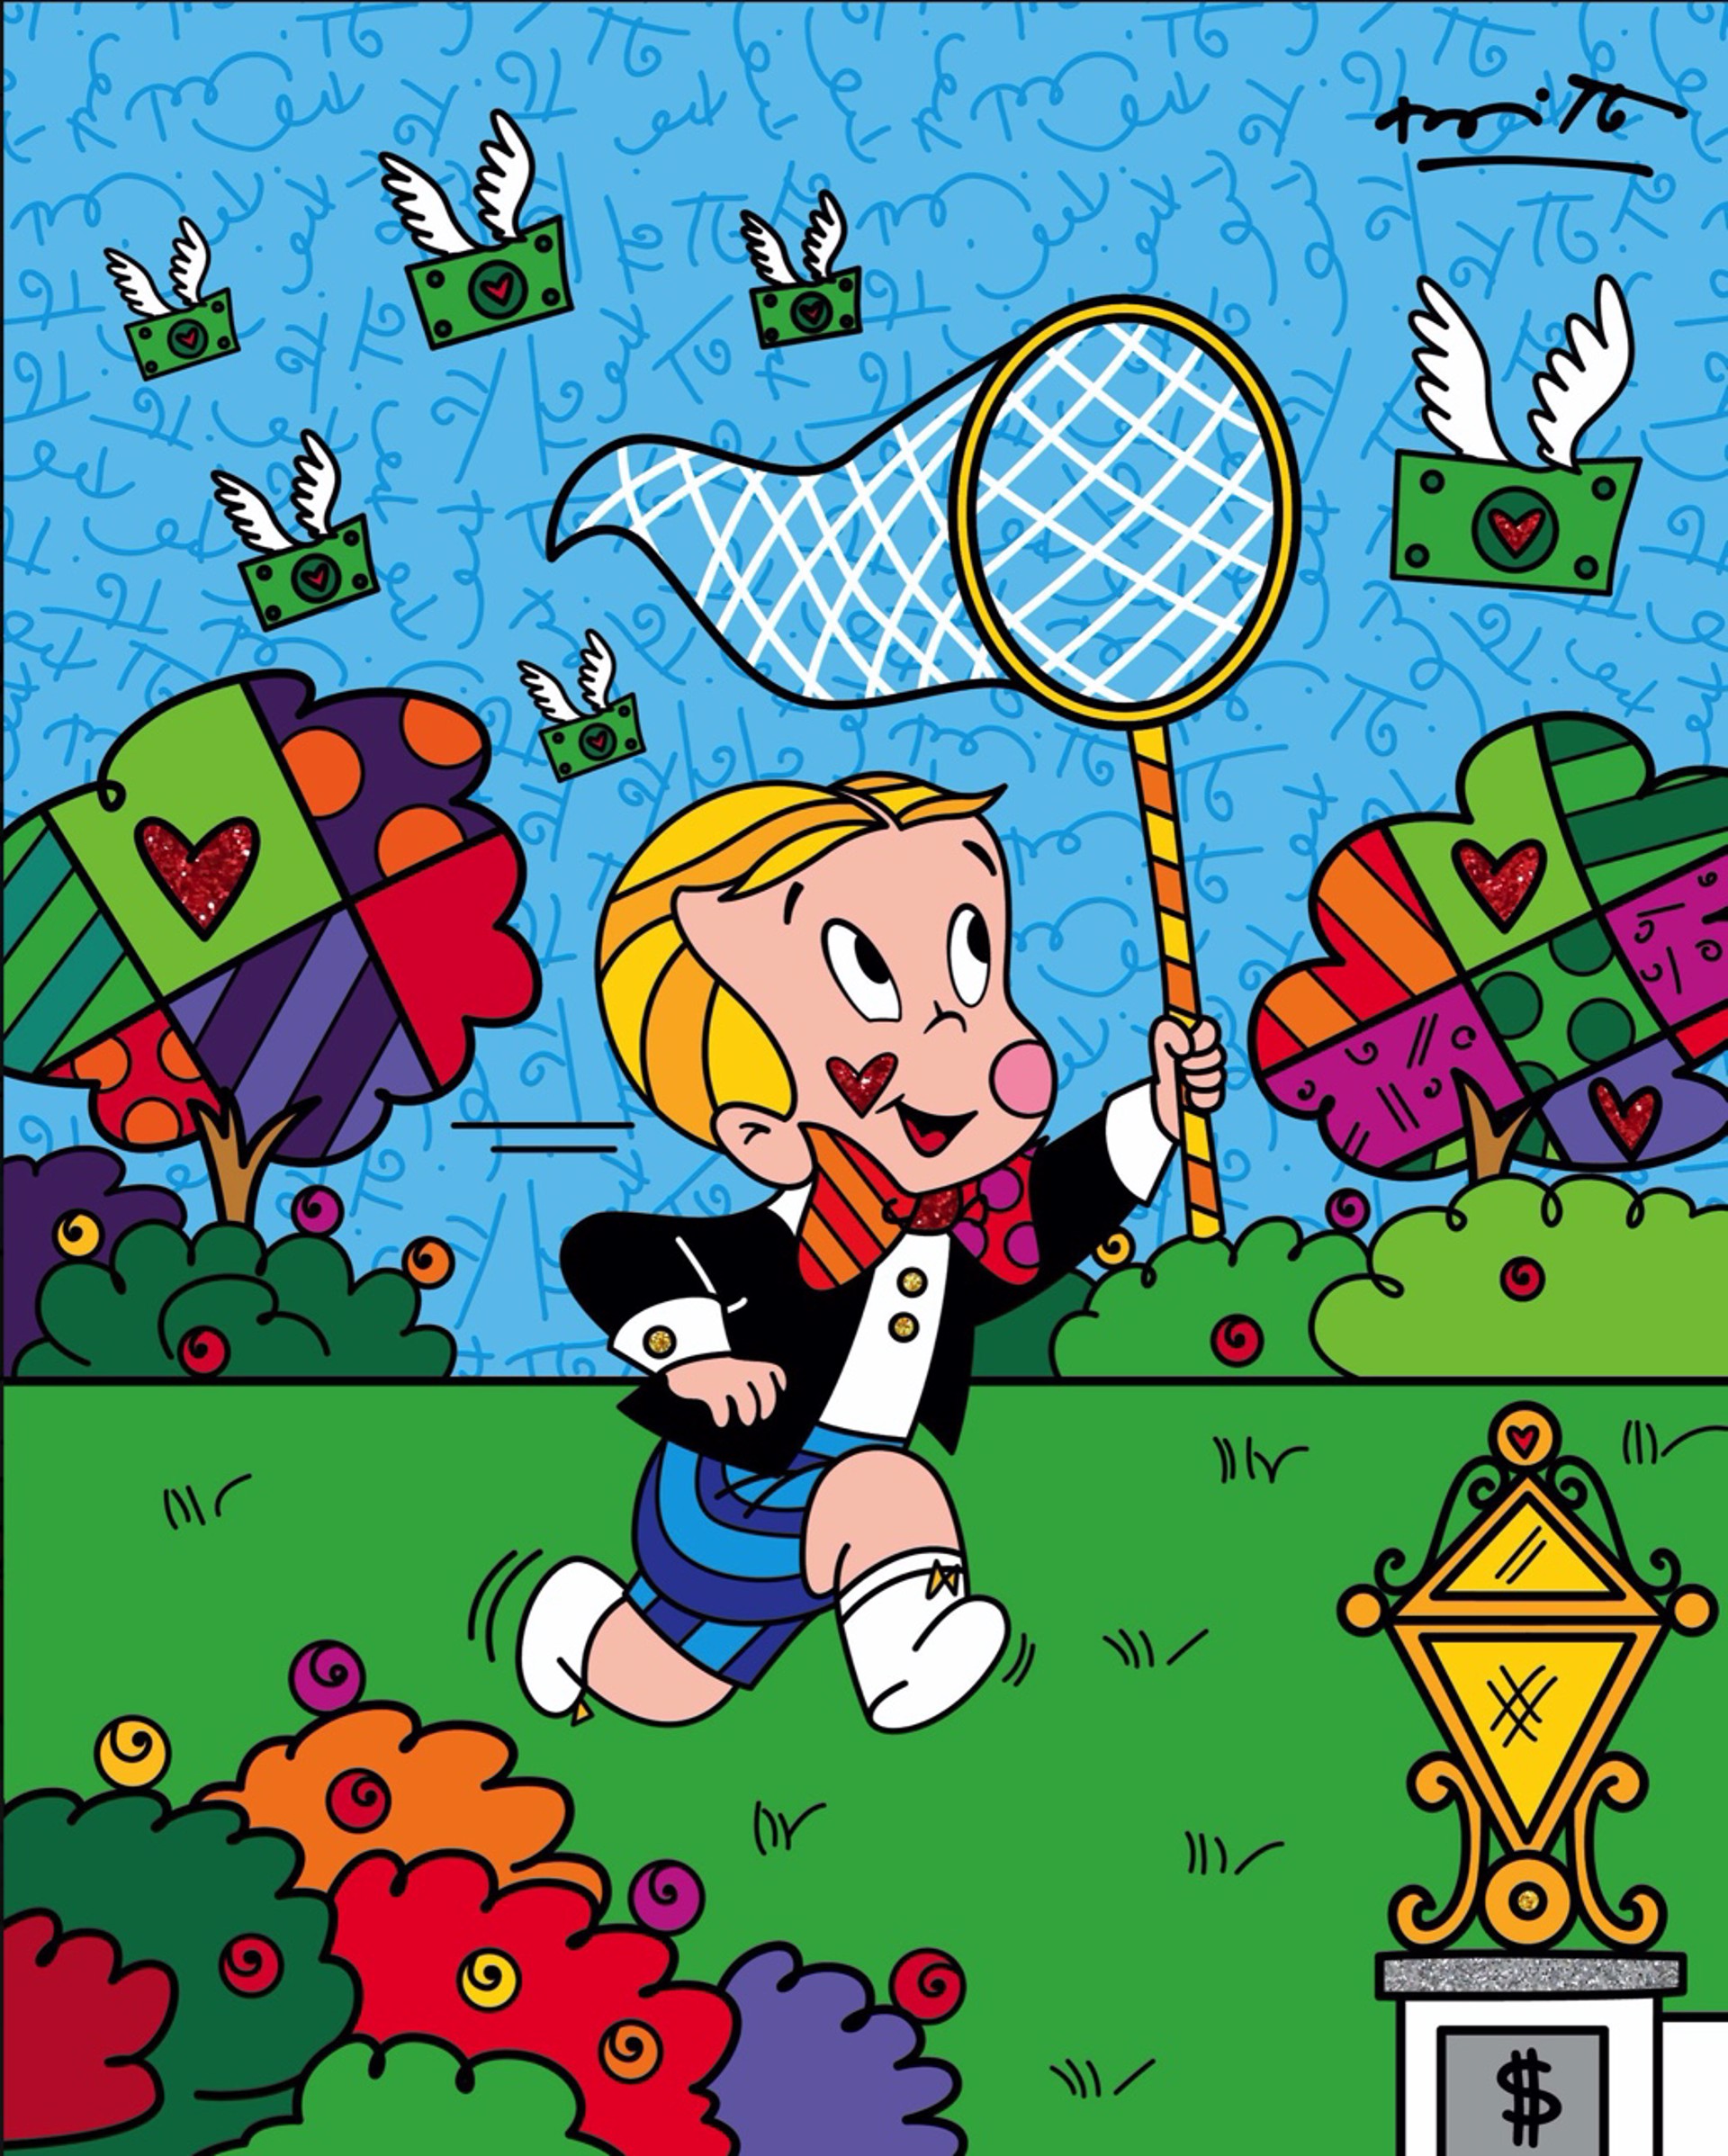 CHASING YOUR DREAMS (NBCUNIVERSAL) by Romero Britto